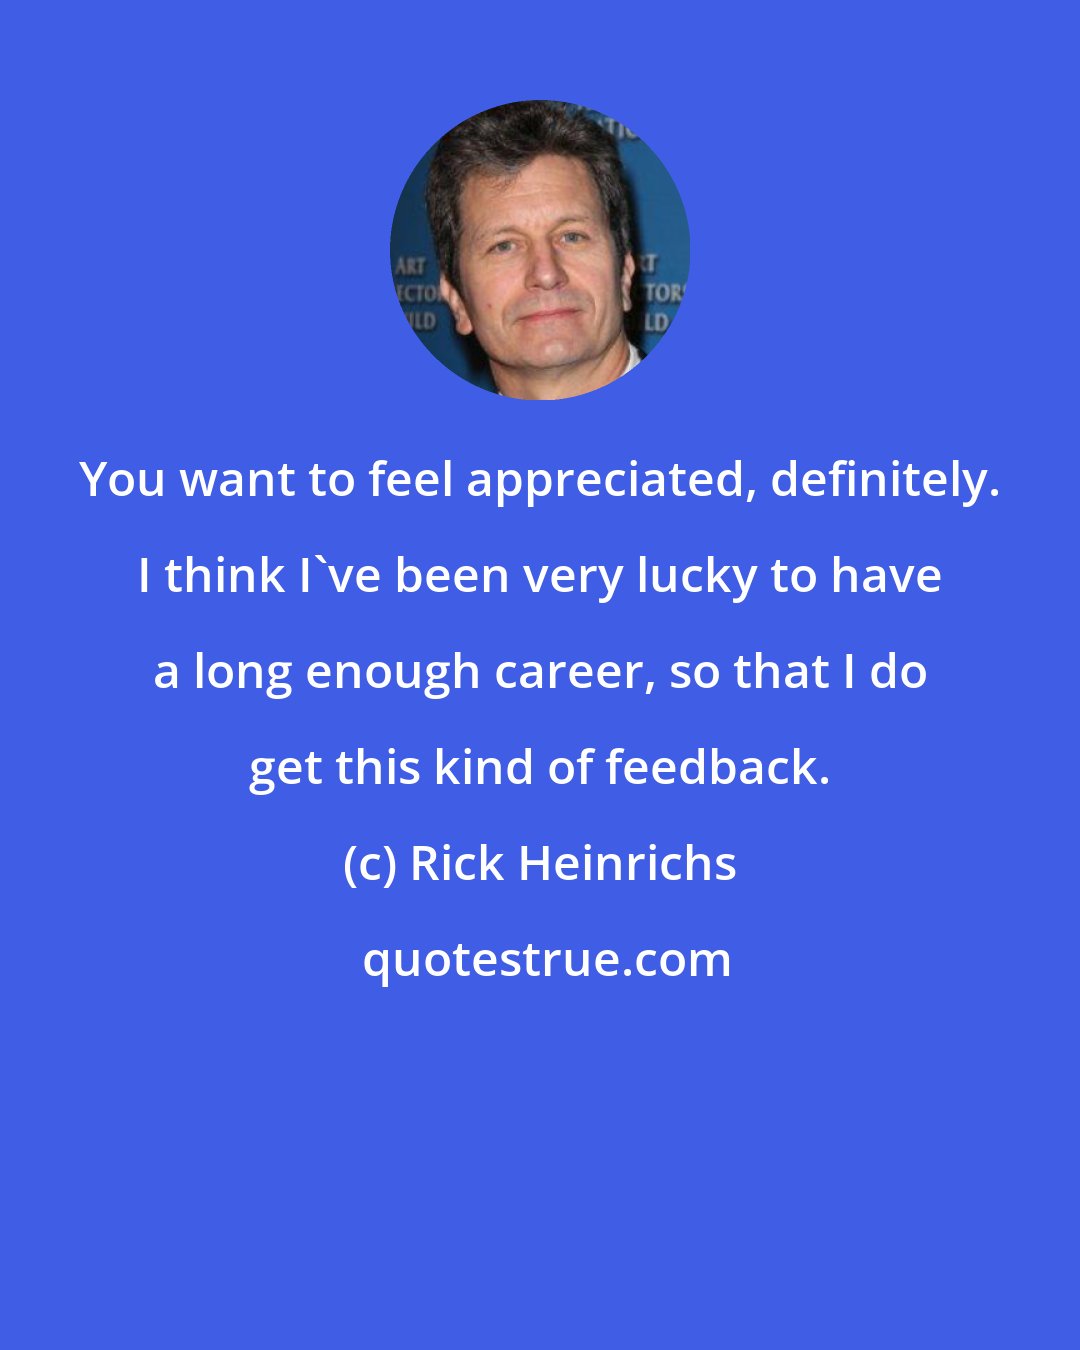 Rick Heinrichs: You want to feel appreciated, definitely. I think I've been very lucky to have a long enough career, so that I do get this kind of feedback.